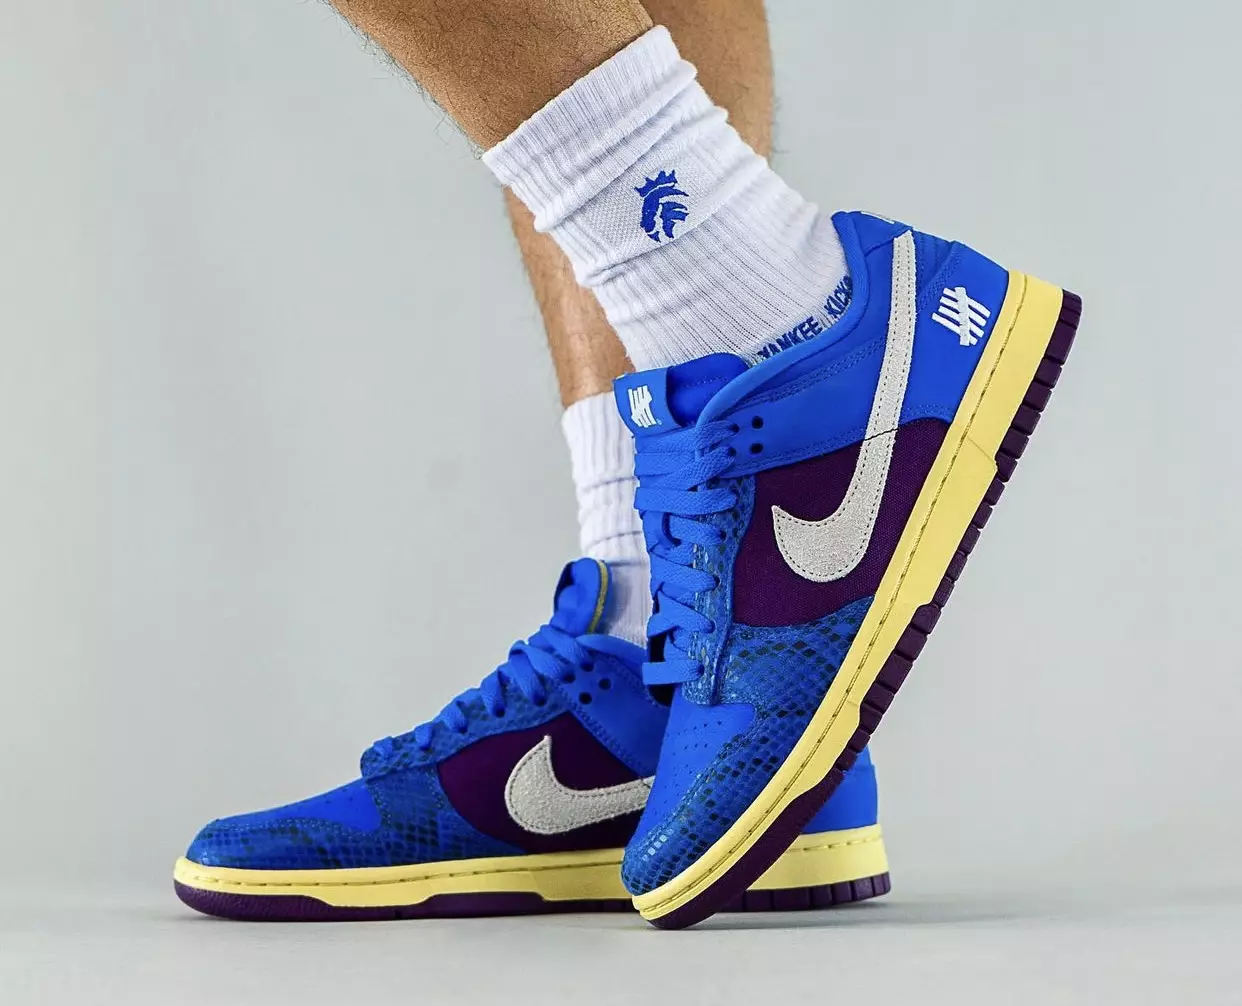 Undefeated Nike Dunk Low Royal Blue Purple DH6508-400 išleidimo data